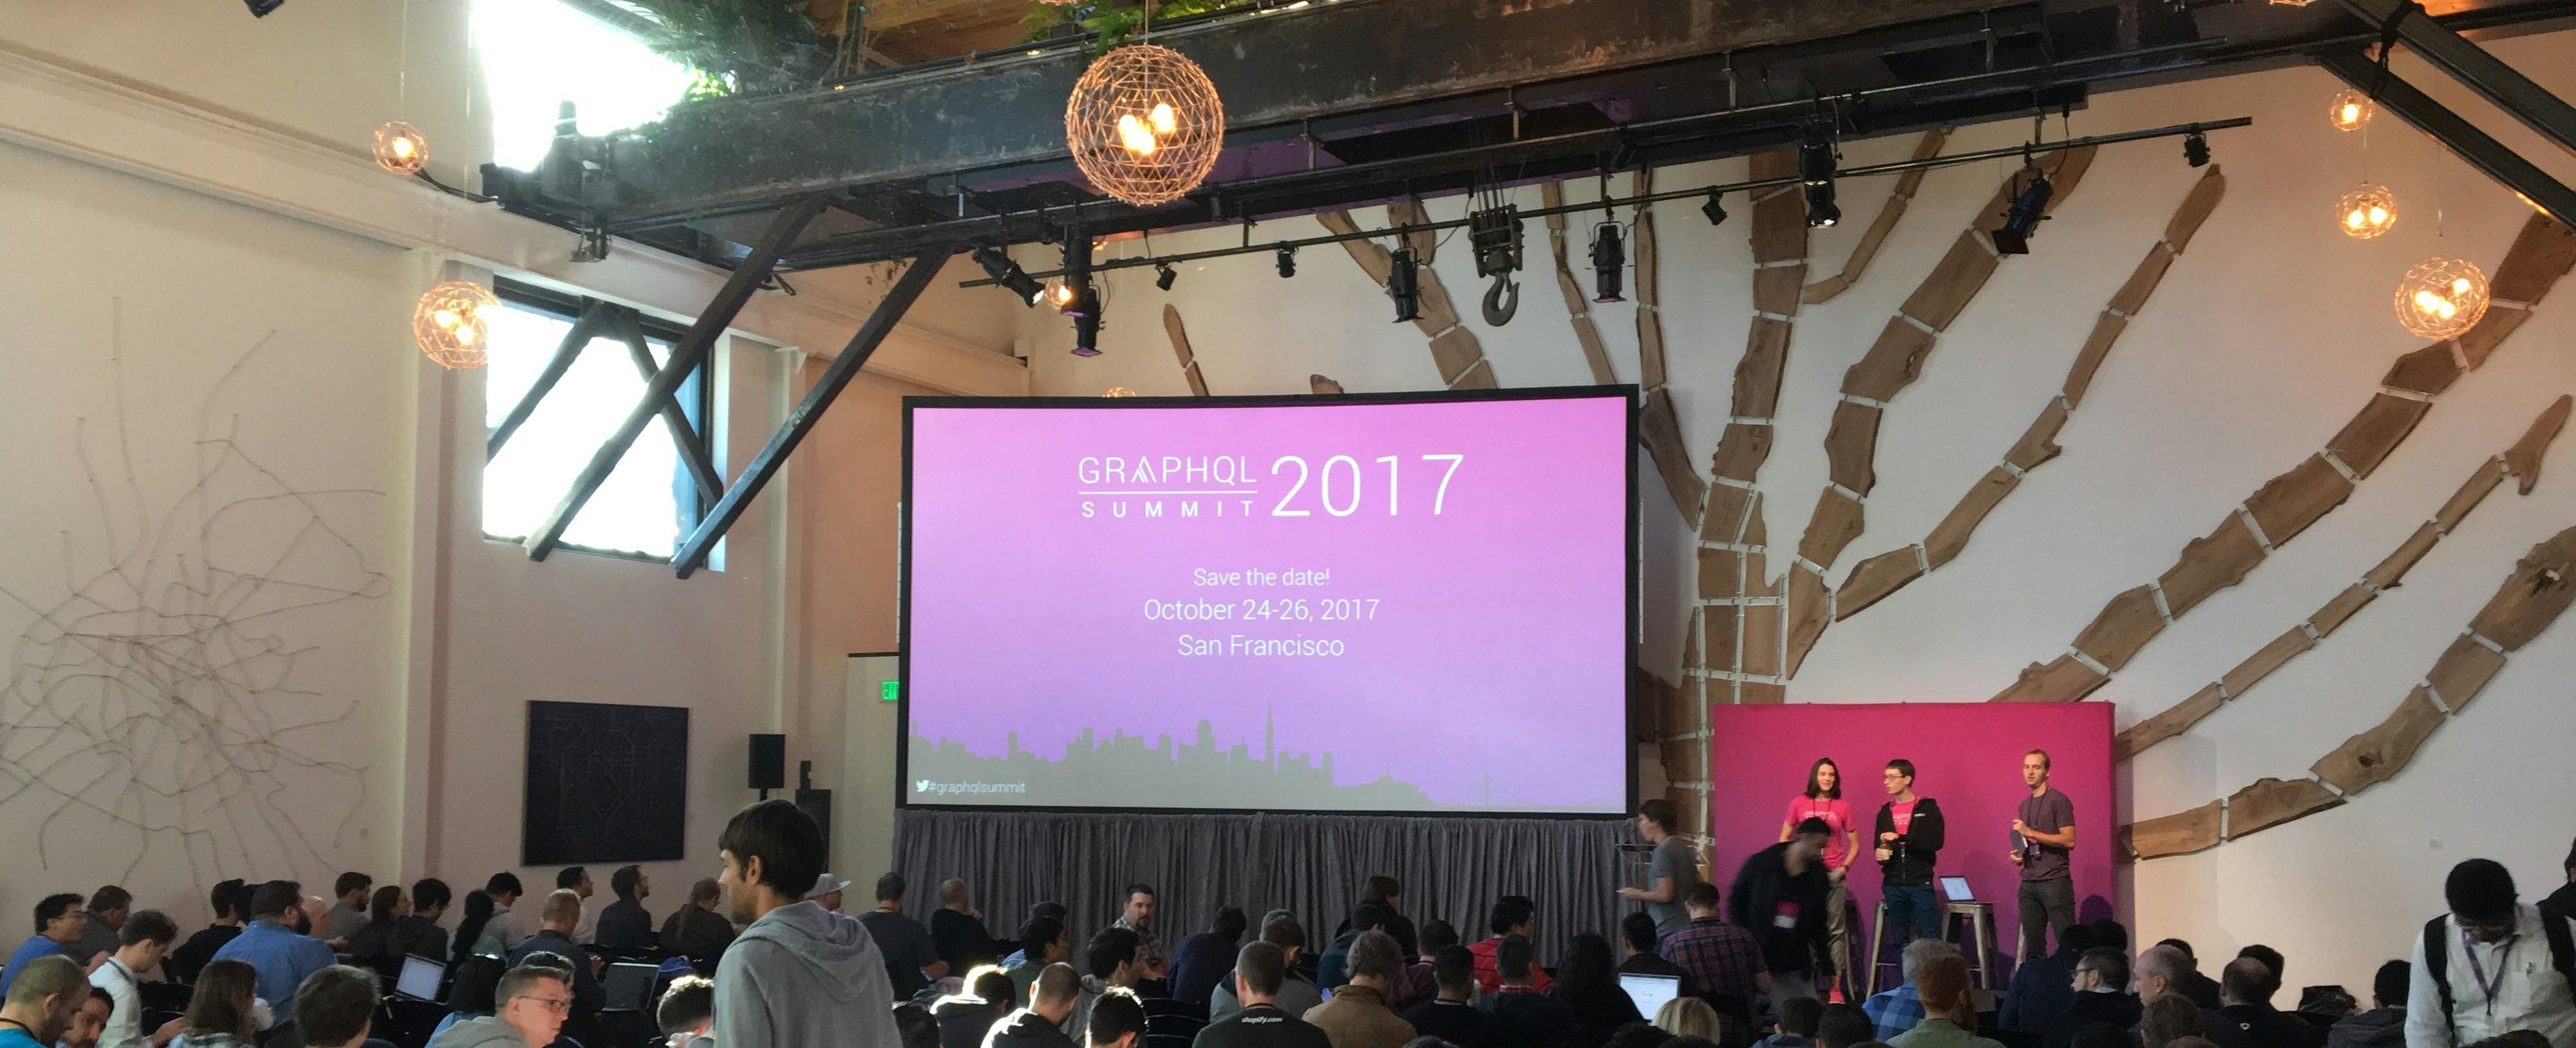 The GraphQL Summit 2017, when we decided to switch from REST to GraphQL.